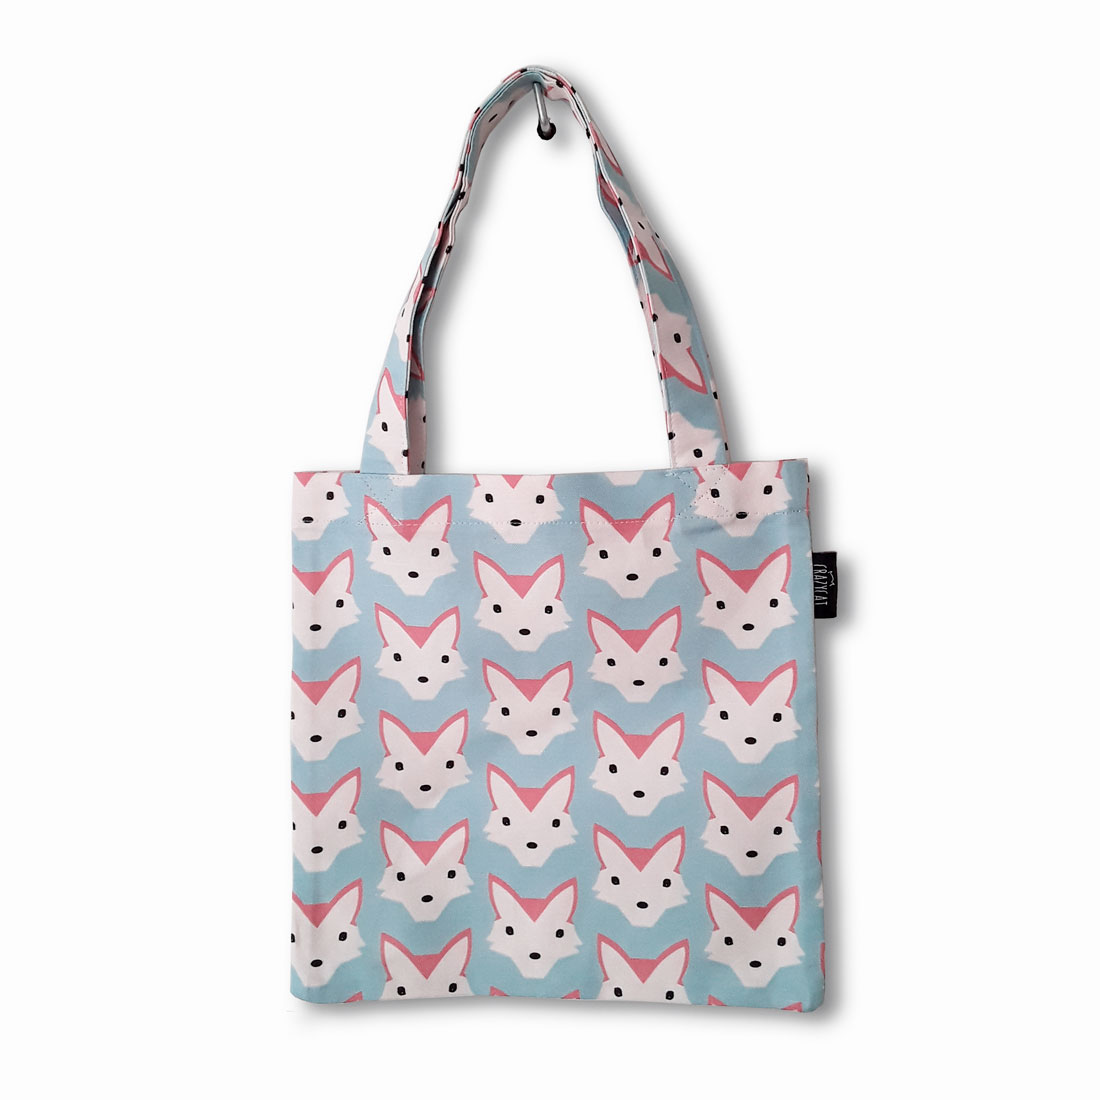 Foxes Tote bag